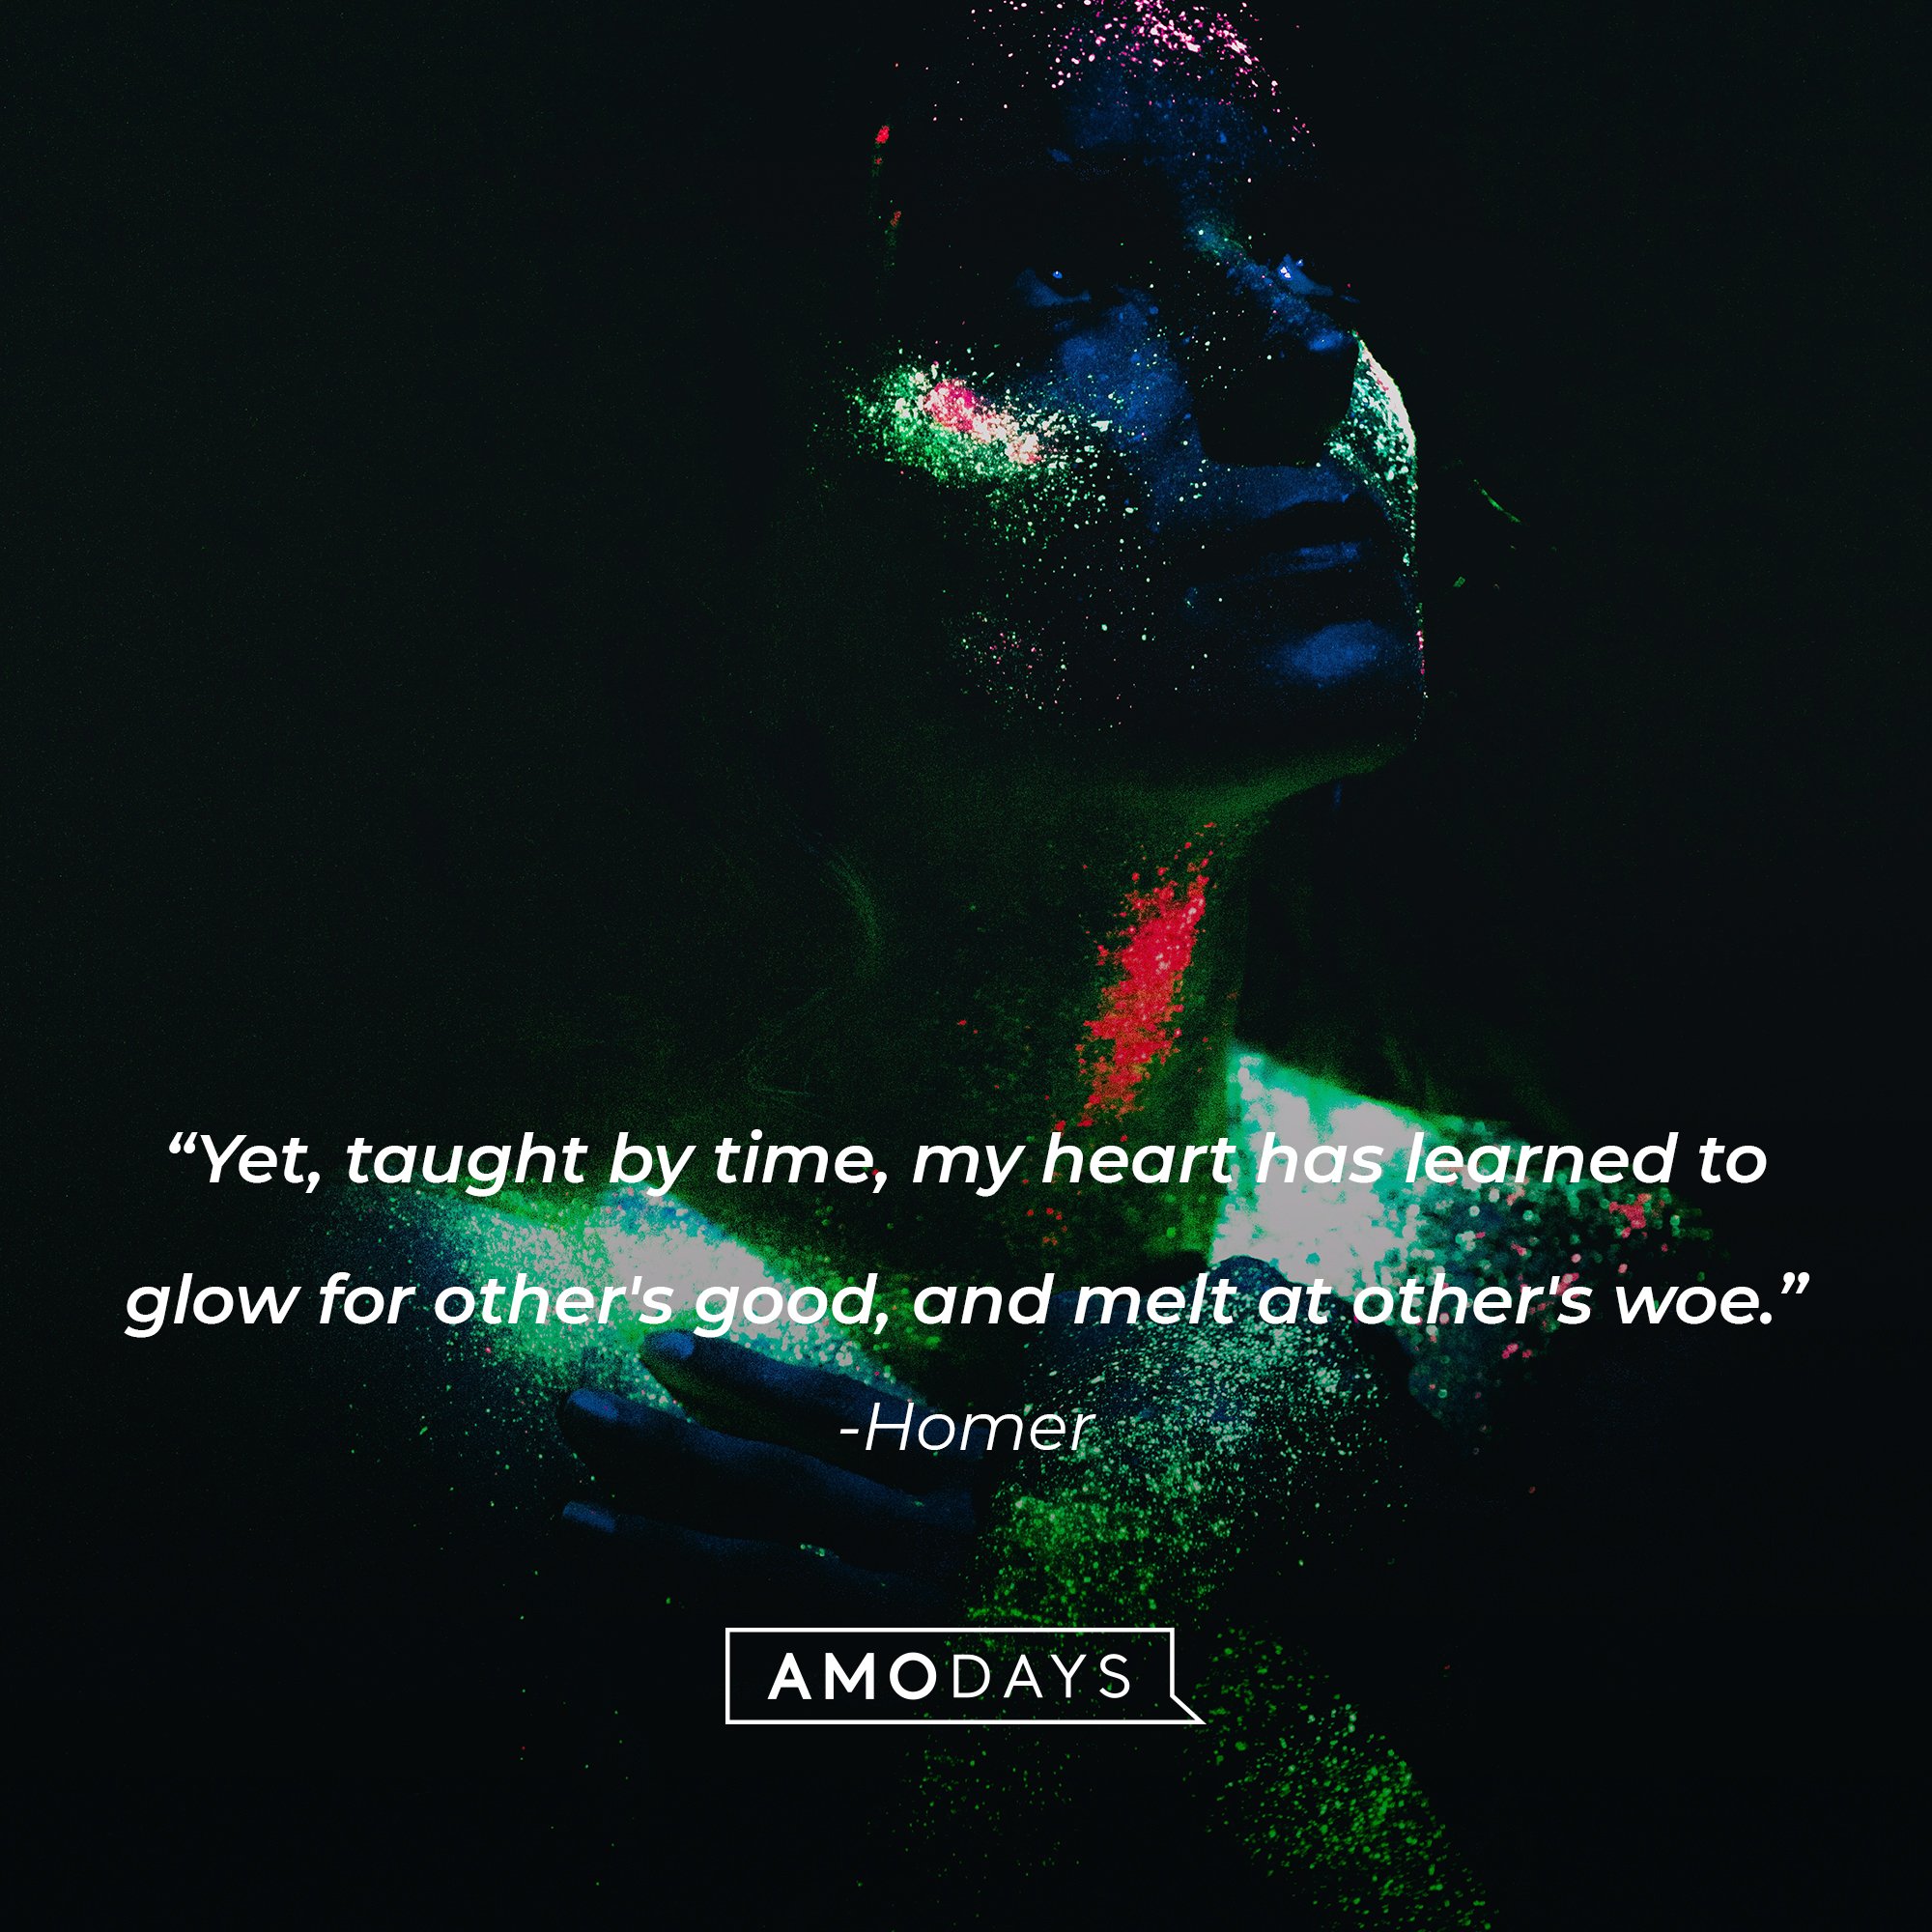 Homer's quote: "Yet, taught by time, my heart has learned to glow for other's good, and melt at other's woe." | Image: AmoDays